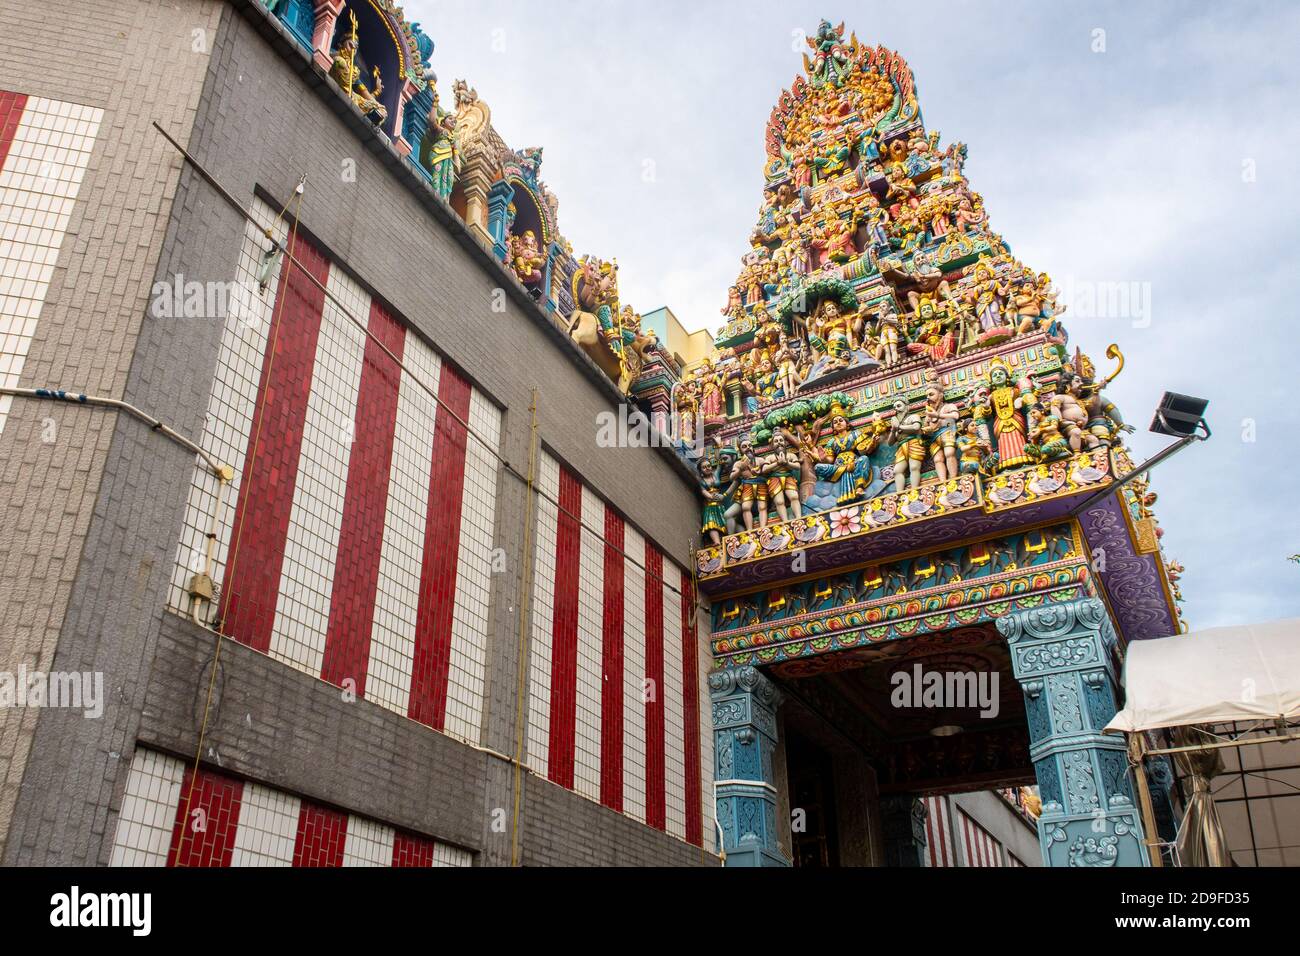 Singapore, 21/01/19. Sri Veeramakaliamman Temple dedicated to the Hindu goddess Kali, with richly decorated carved colorful roof with Hindu Gods. Stock Photo